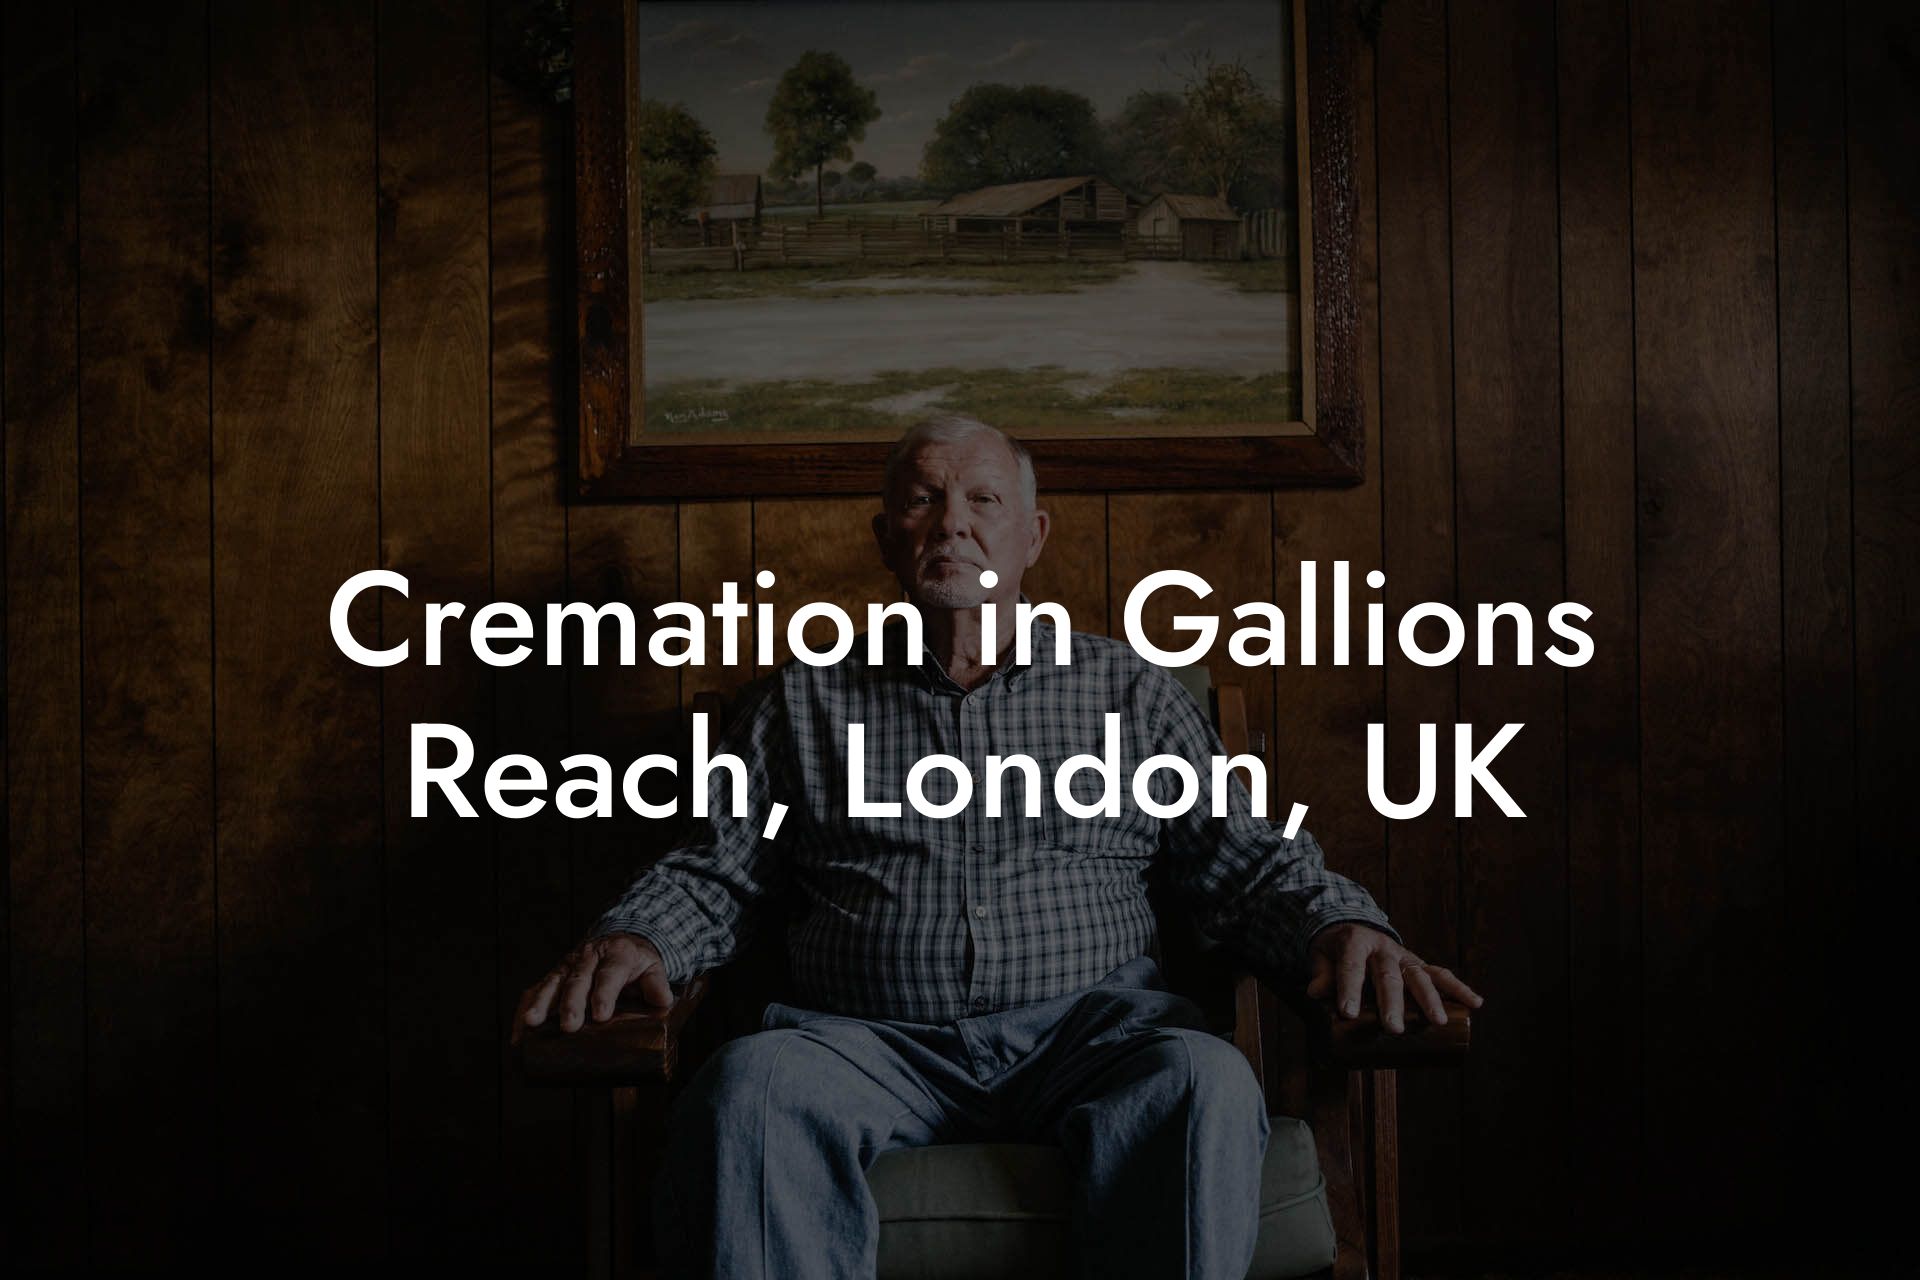 Cremation in Gallions Reach, London, UK